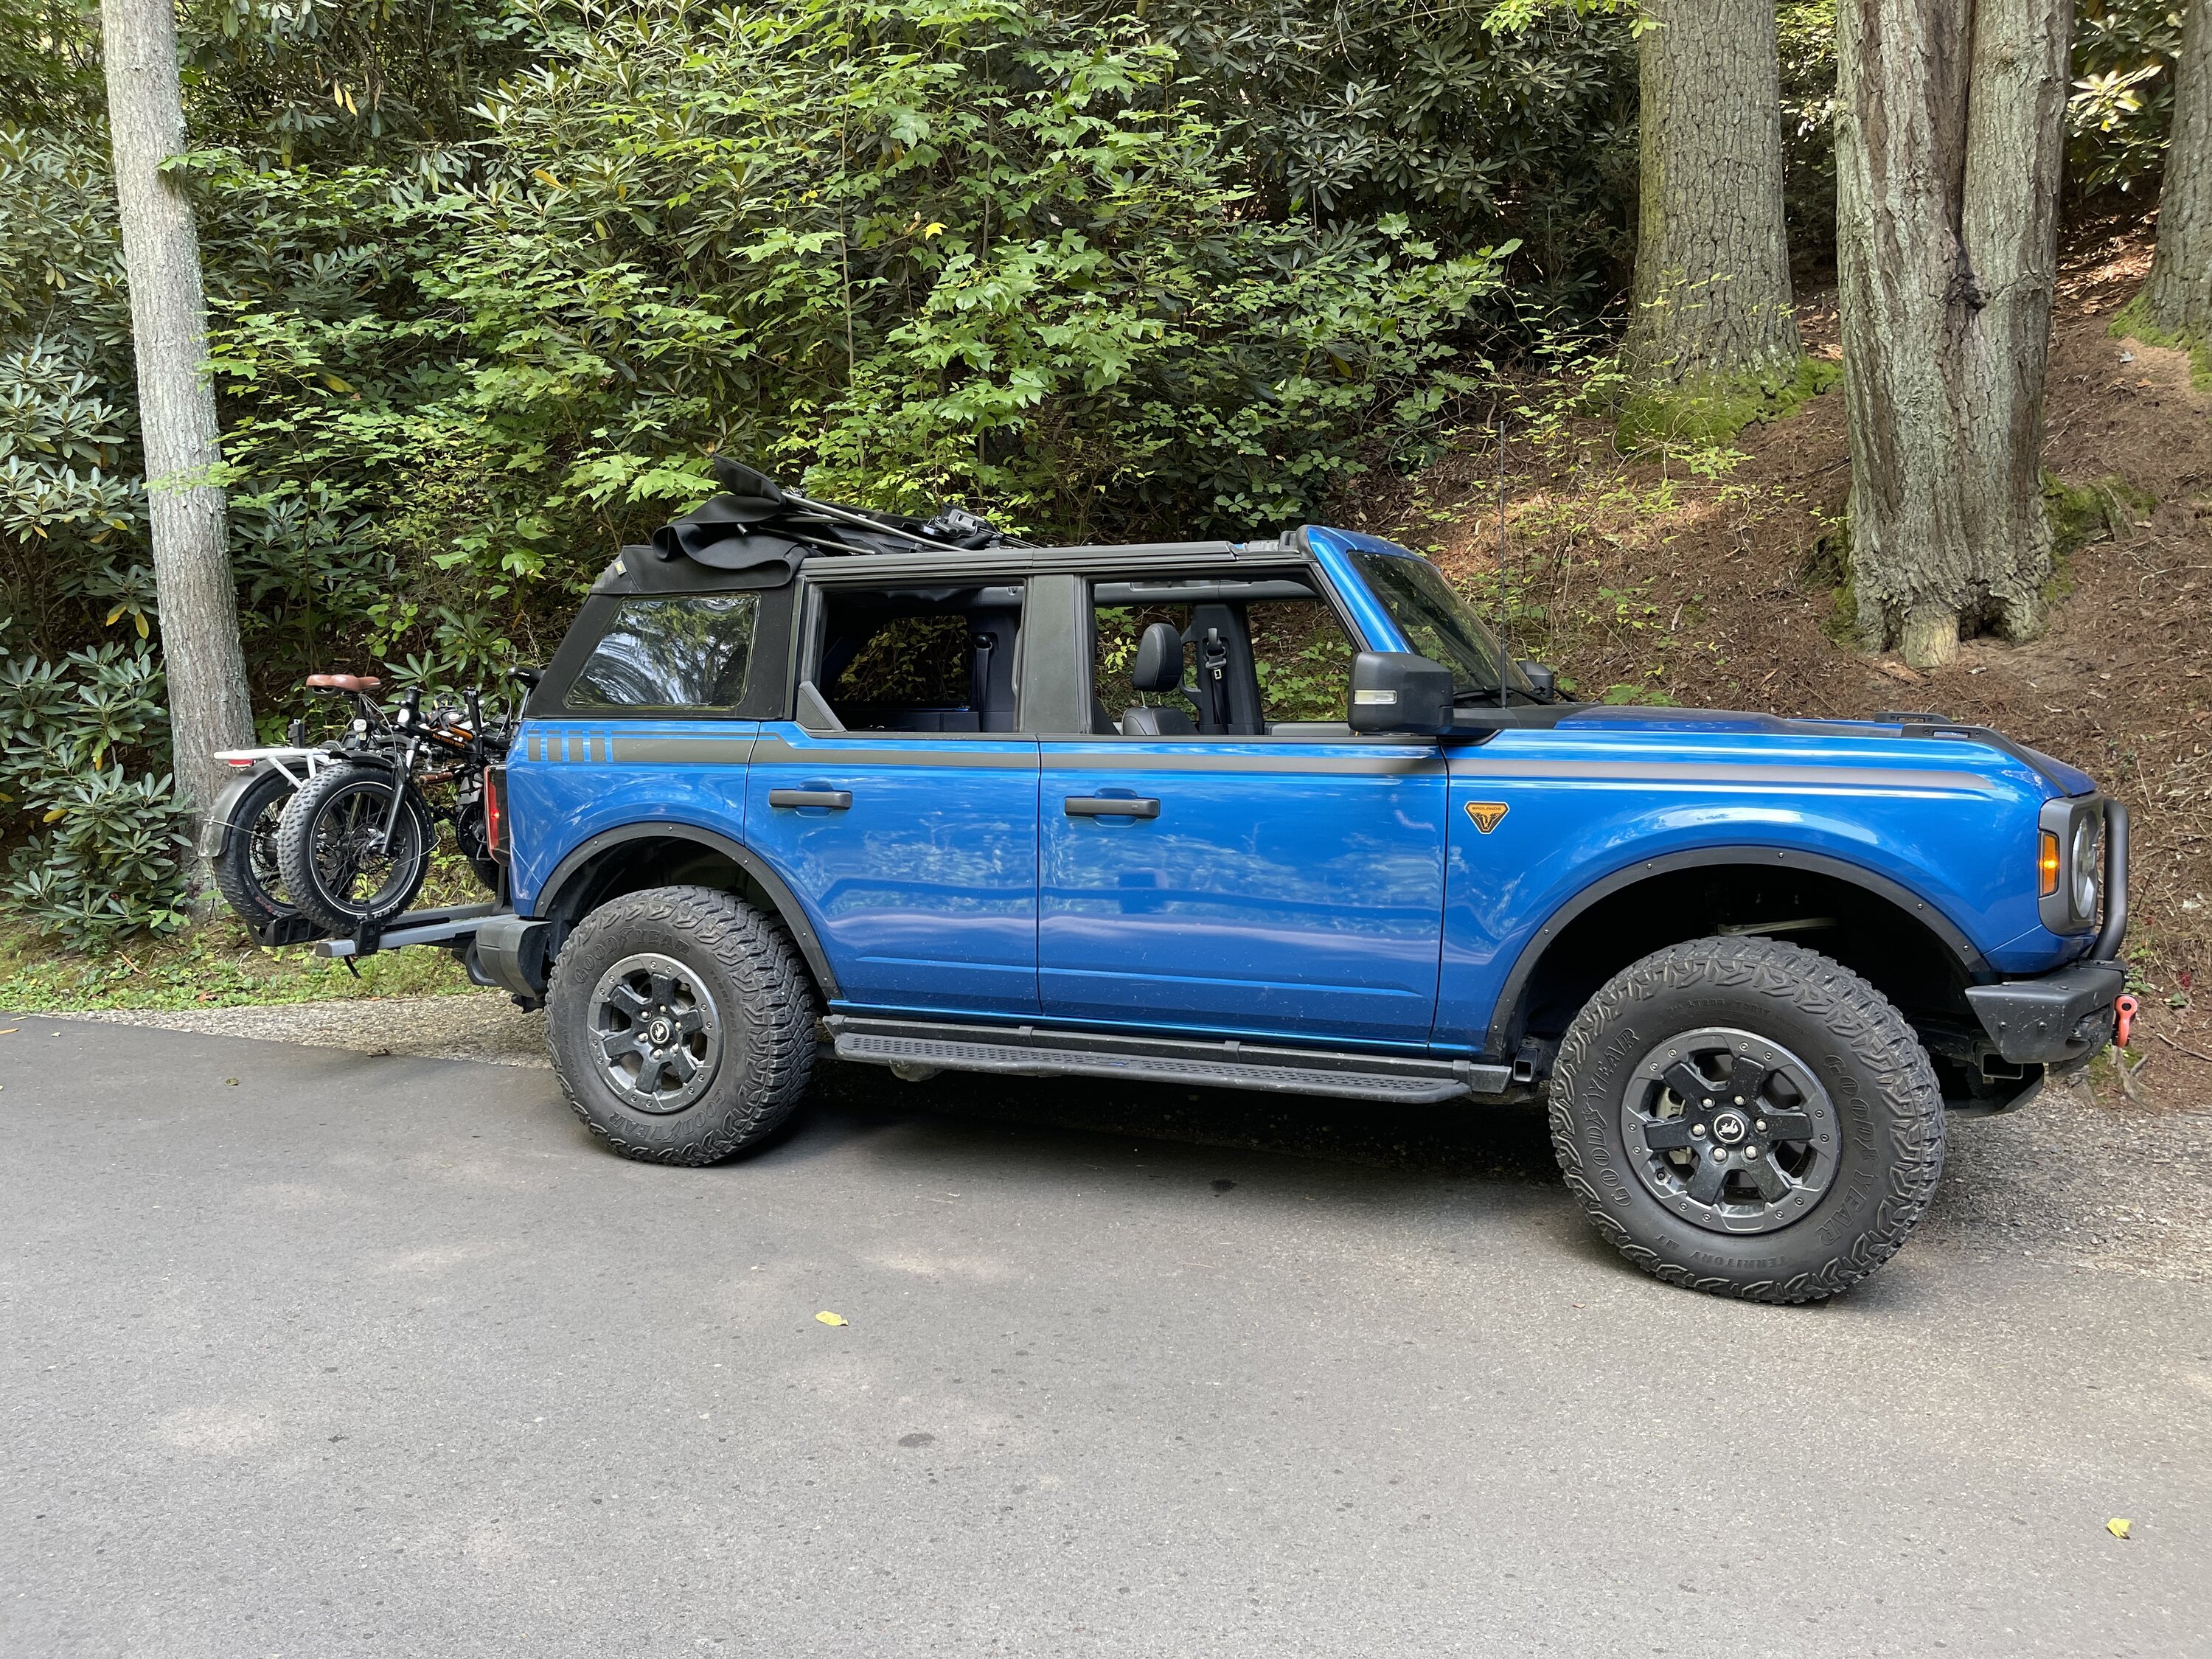 Ford Bronco A Day with our Bronco & E-Bikes at Biltmore Estates! 7C7654D9-2456-47F6-8B64-73751CCD23B1